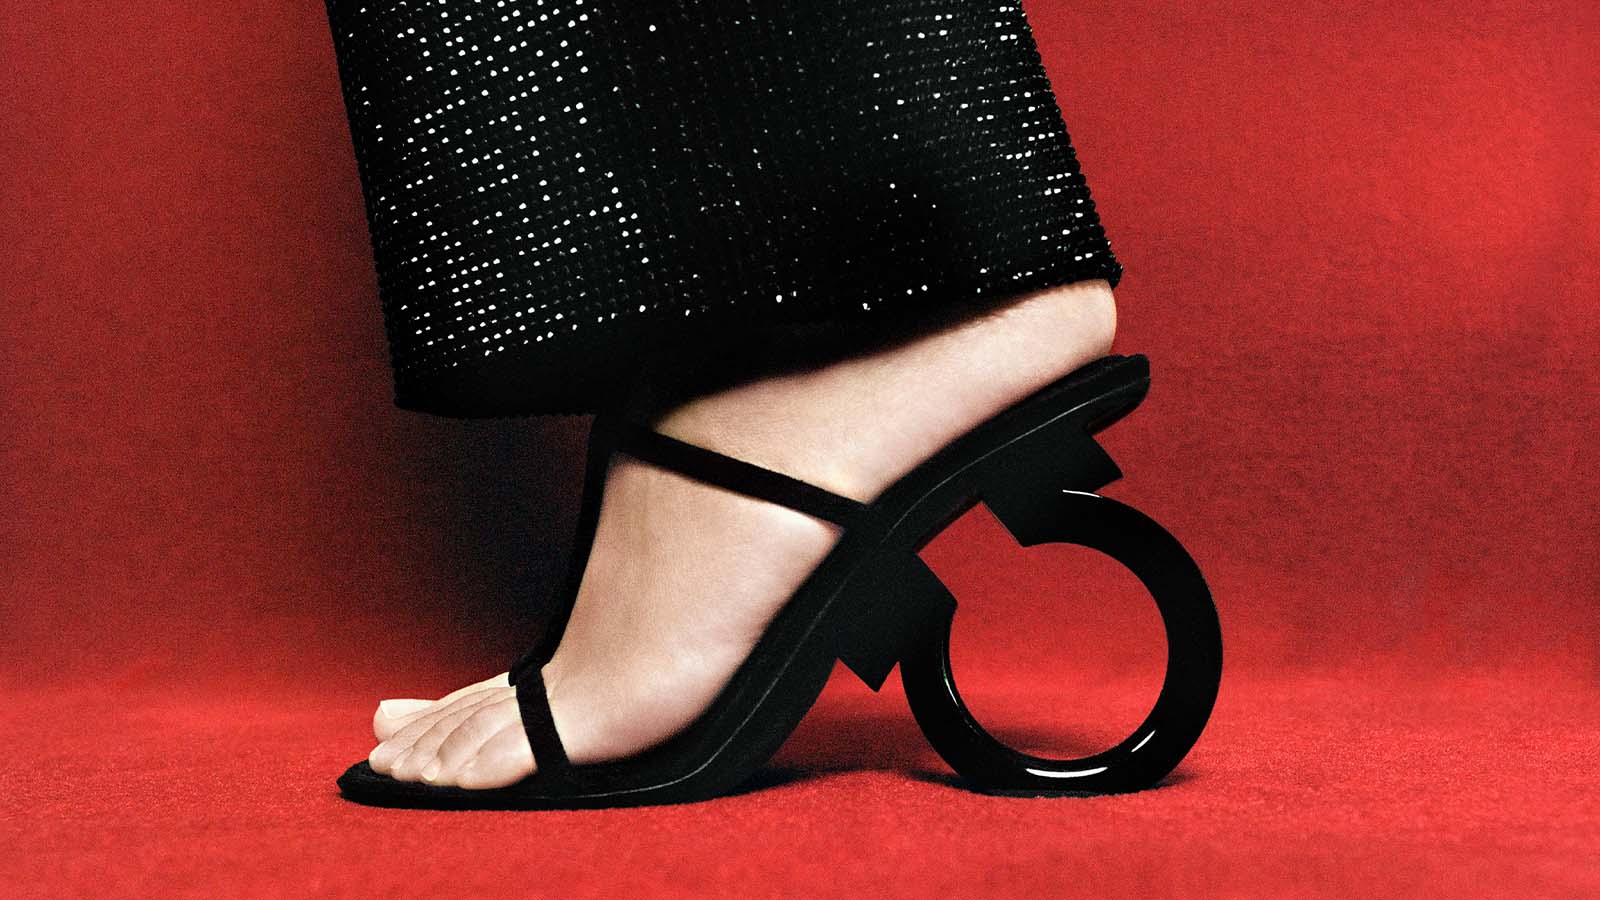 These sculptural Ferragamo heels tell a story about the house's